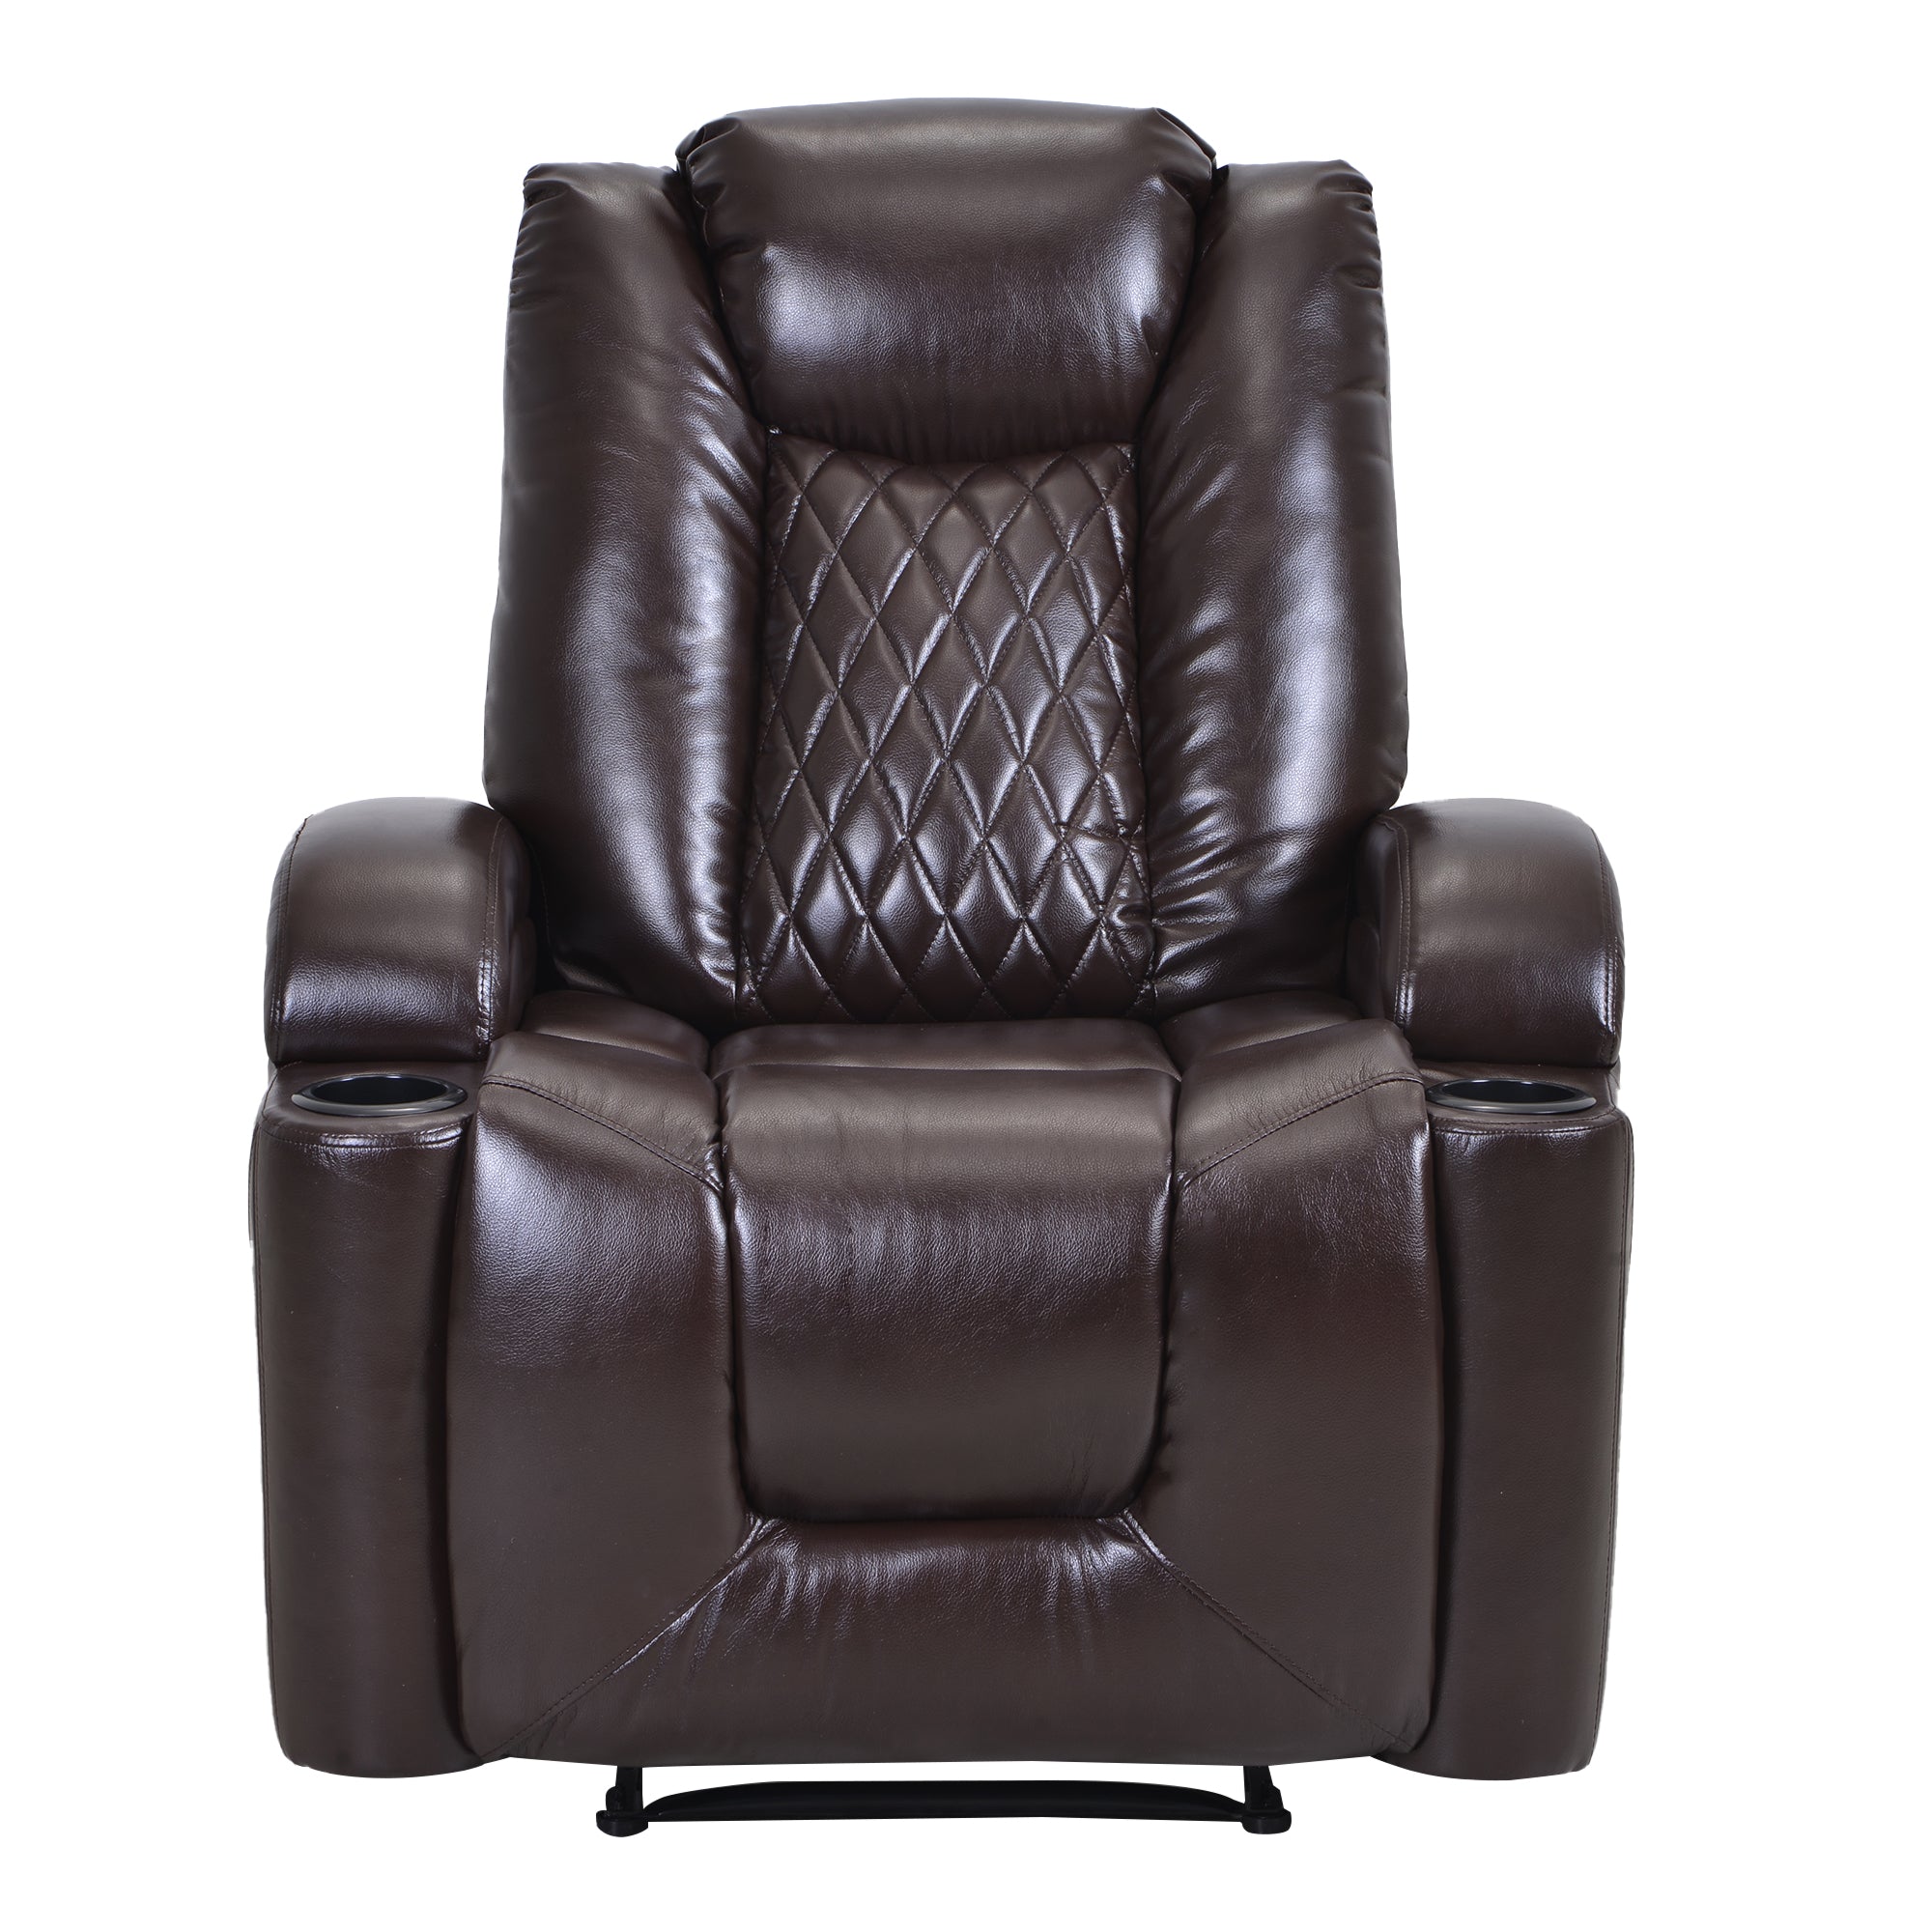 RaDEWAY Power Motion Recliner with USB Charge Port and Cup Holder -PU Lounge chair for Living Room